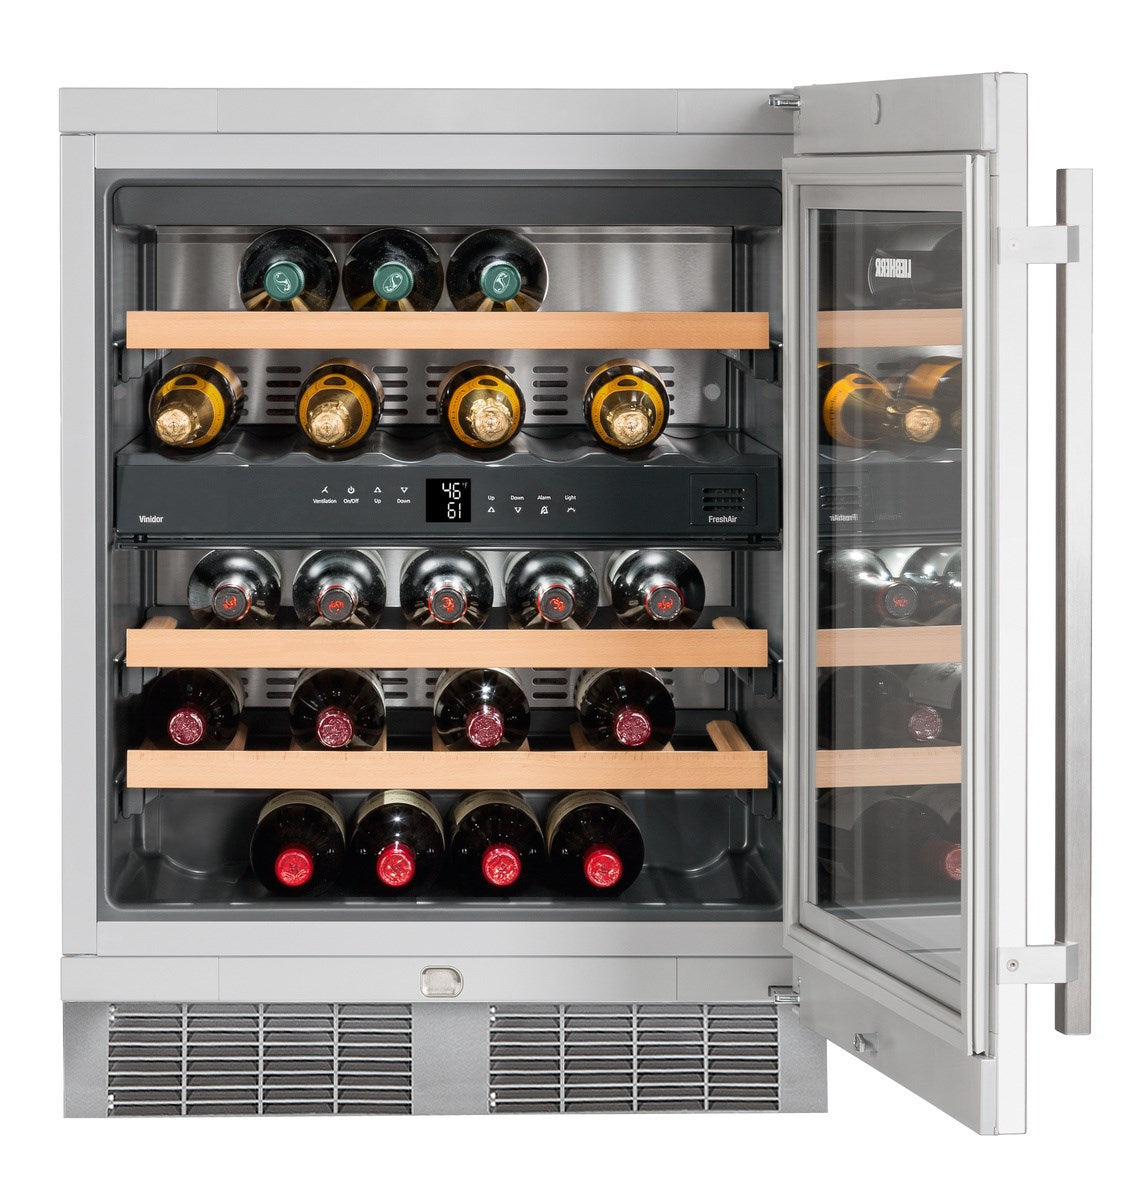 Liebherr - 23.5625 Inch 3.3 cu. ft Built In / Integrated Wine Fridge Refrigerator in Stainless - WU3400